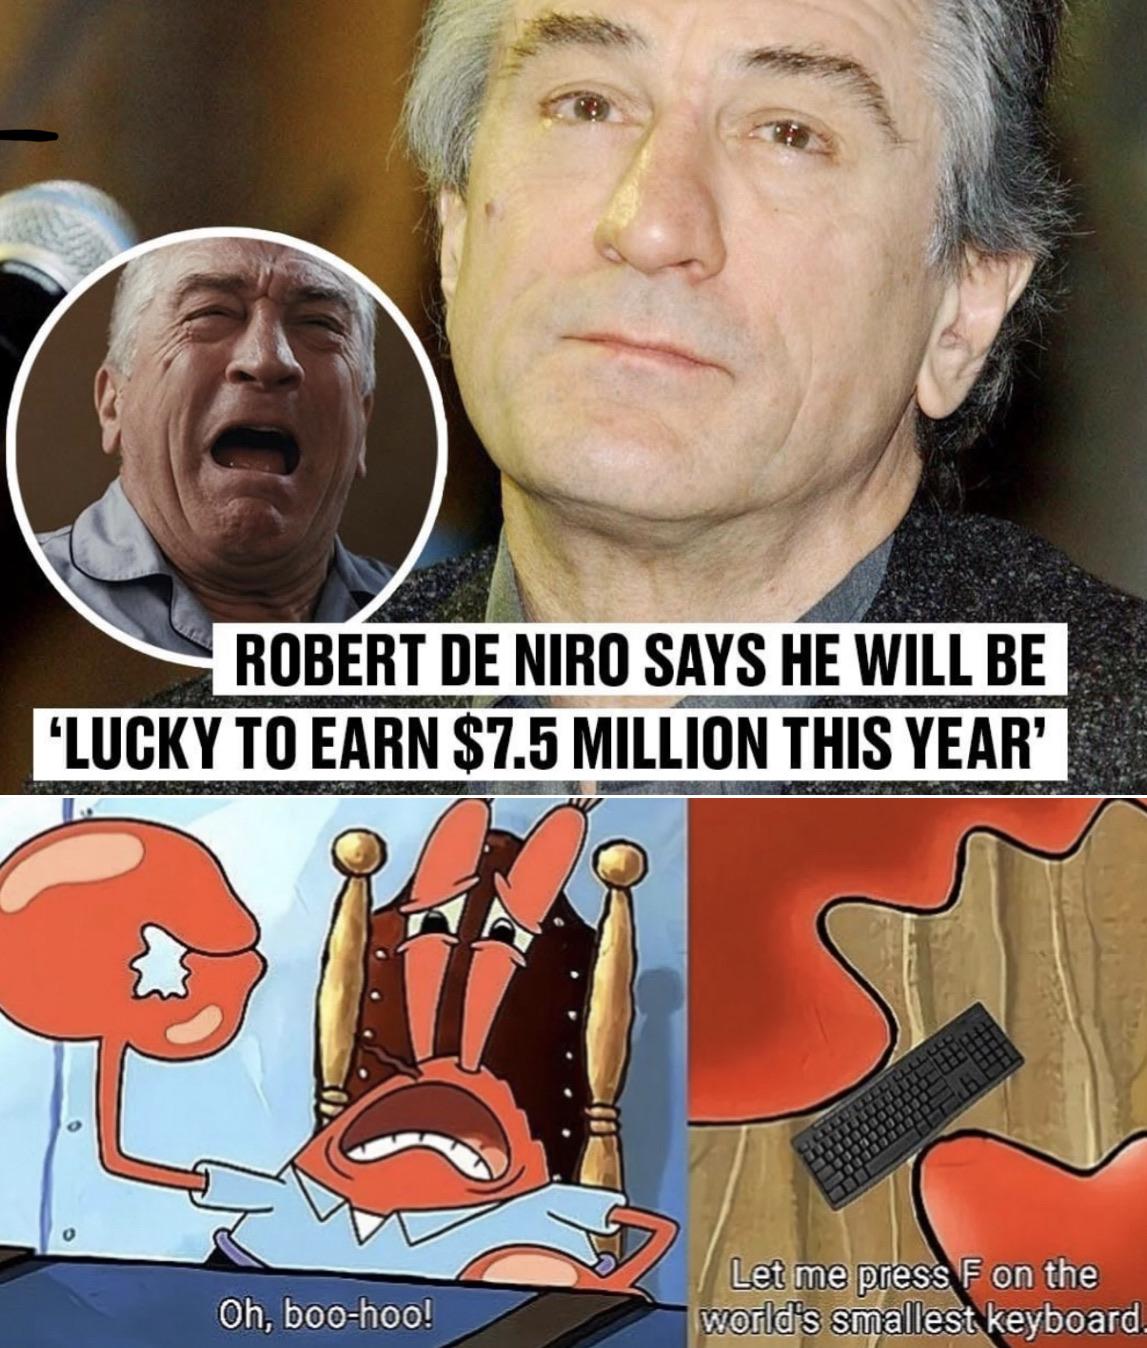 Funny, Spanish, Robert, PPP, Niro, Murray other memes Funny, Spanish, Robert, PPP, Niro, Murray text: ROBERT DE NIRO SAYS HE WILL BE 'LUCKY TO EARN $7.5 MILLION THIS YEAR' Oh, boo-hoo! Let me press Eon the v<i$snallest keyboard. 